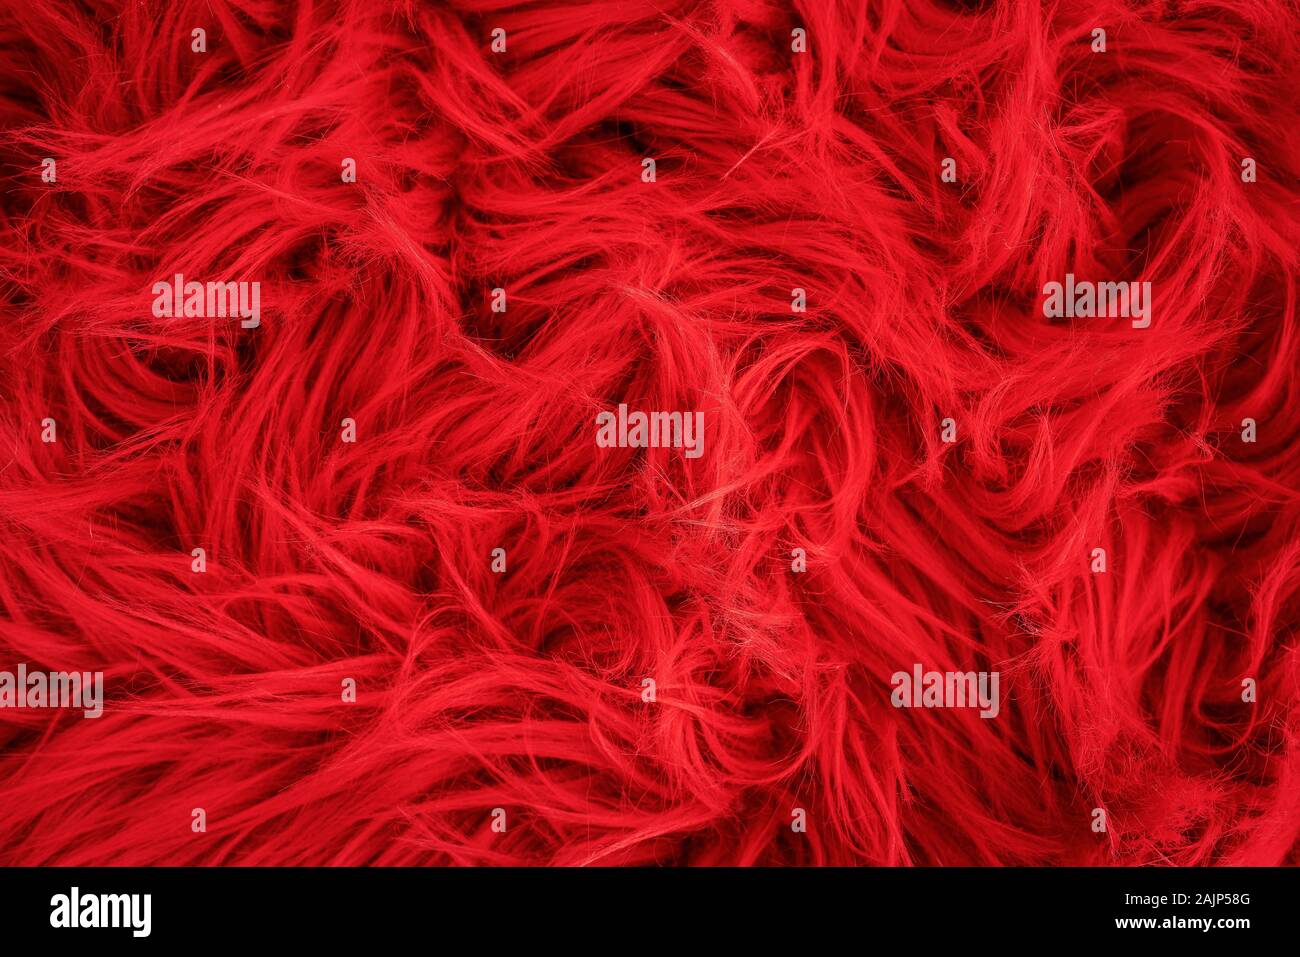 Shaggy carpet with wool material for backgrounds texture, close up of soft romantic pastel red and fluffy. Stock Photo